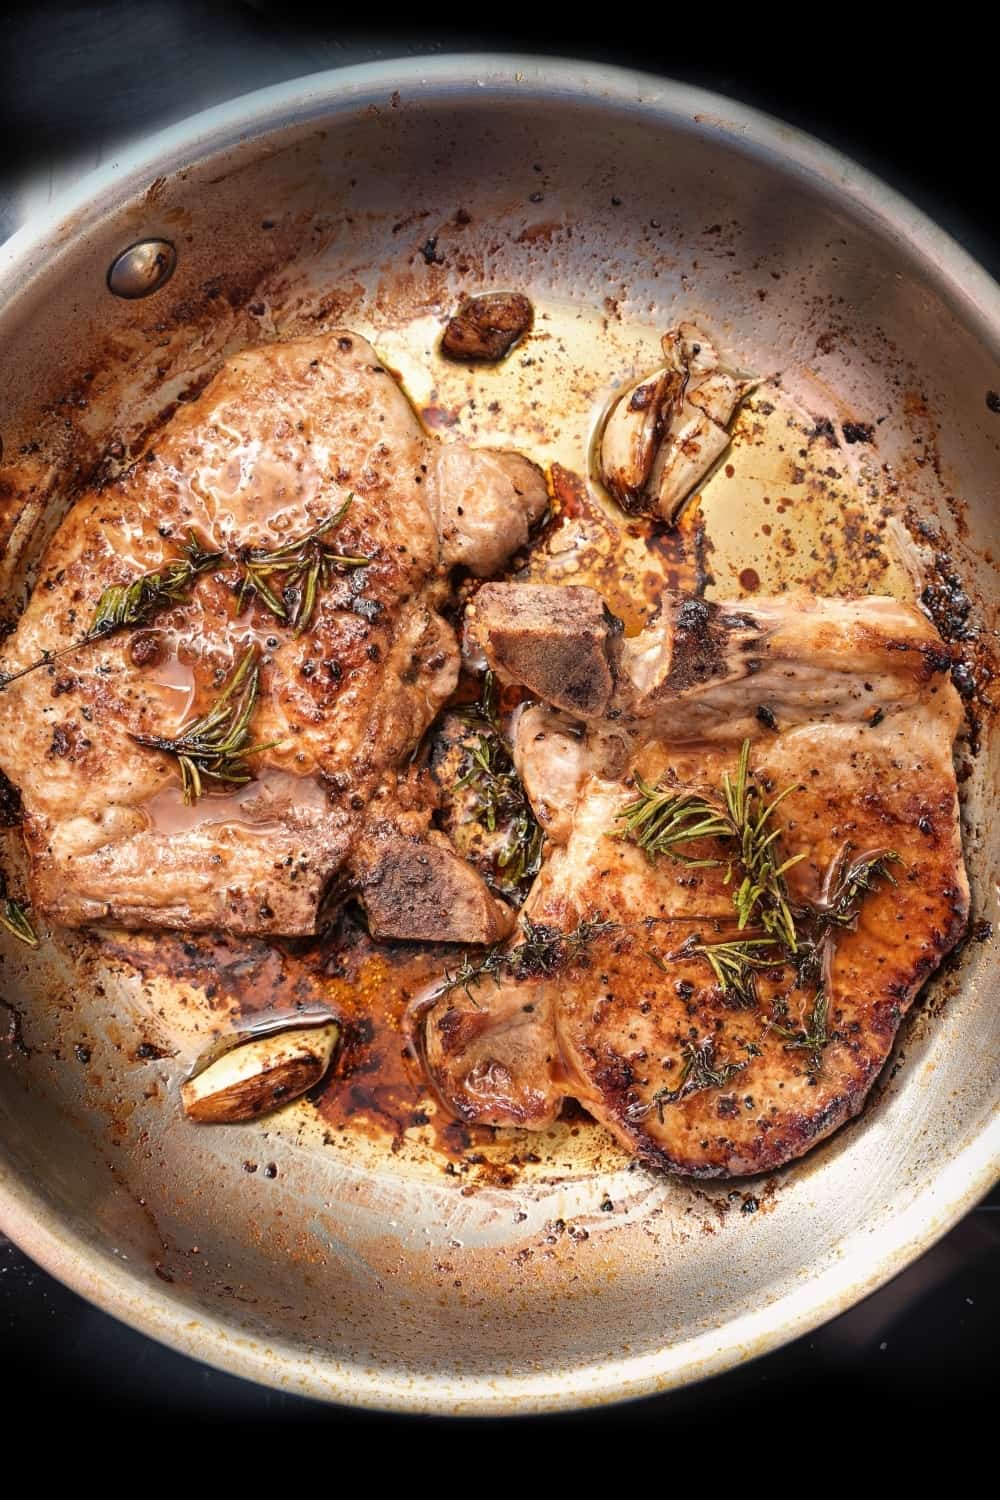 Roasted pork chops with herbs, spices and garlic in a frying pan